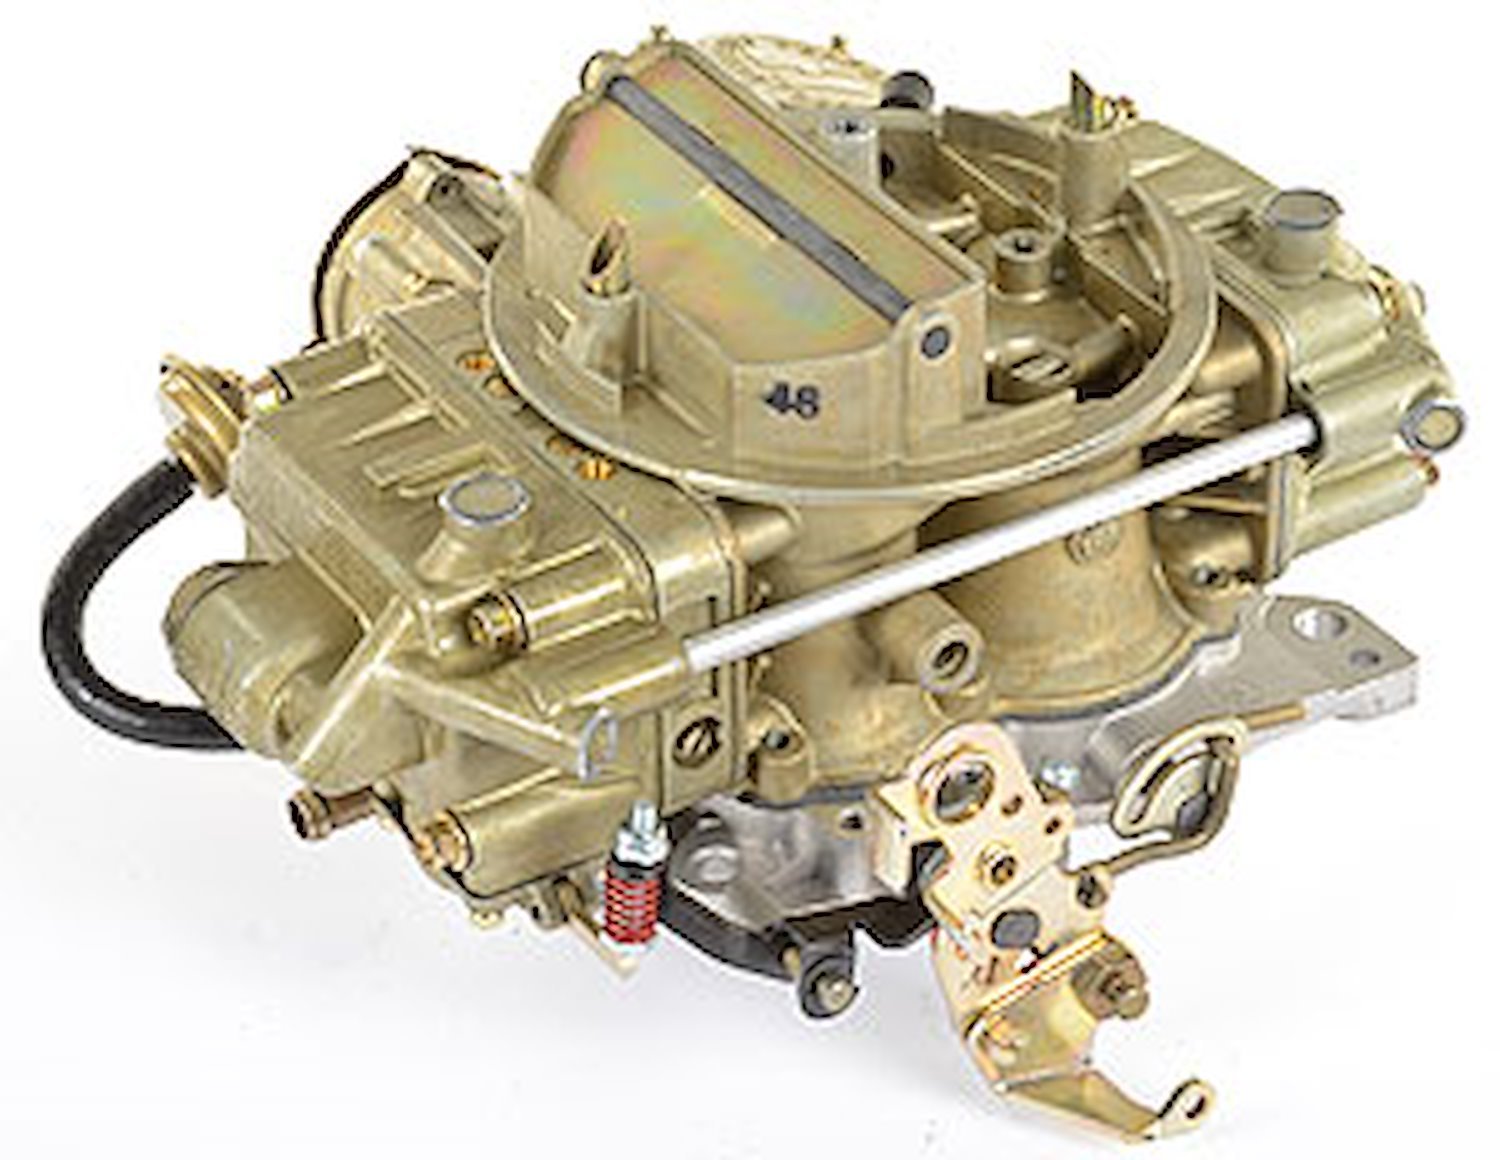 0-80555C Vacuum Secondary 650 cfm Carb Universal for 1965-69 GM applications only. Will not fit Ford or Mopar applications